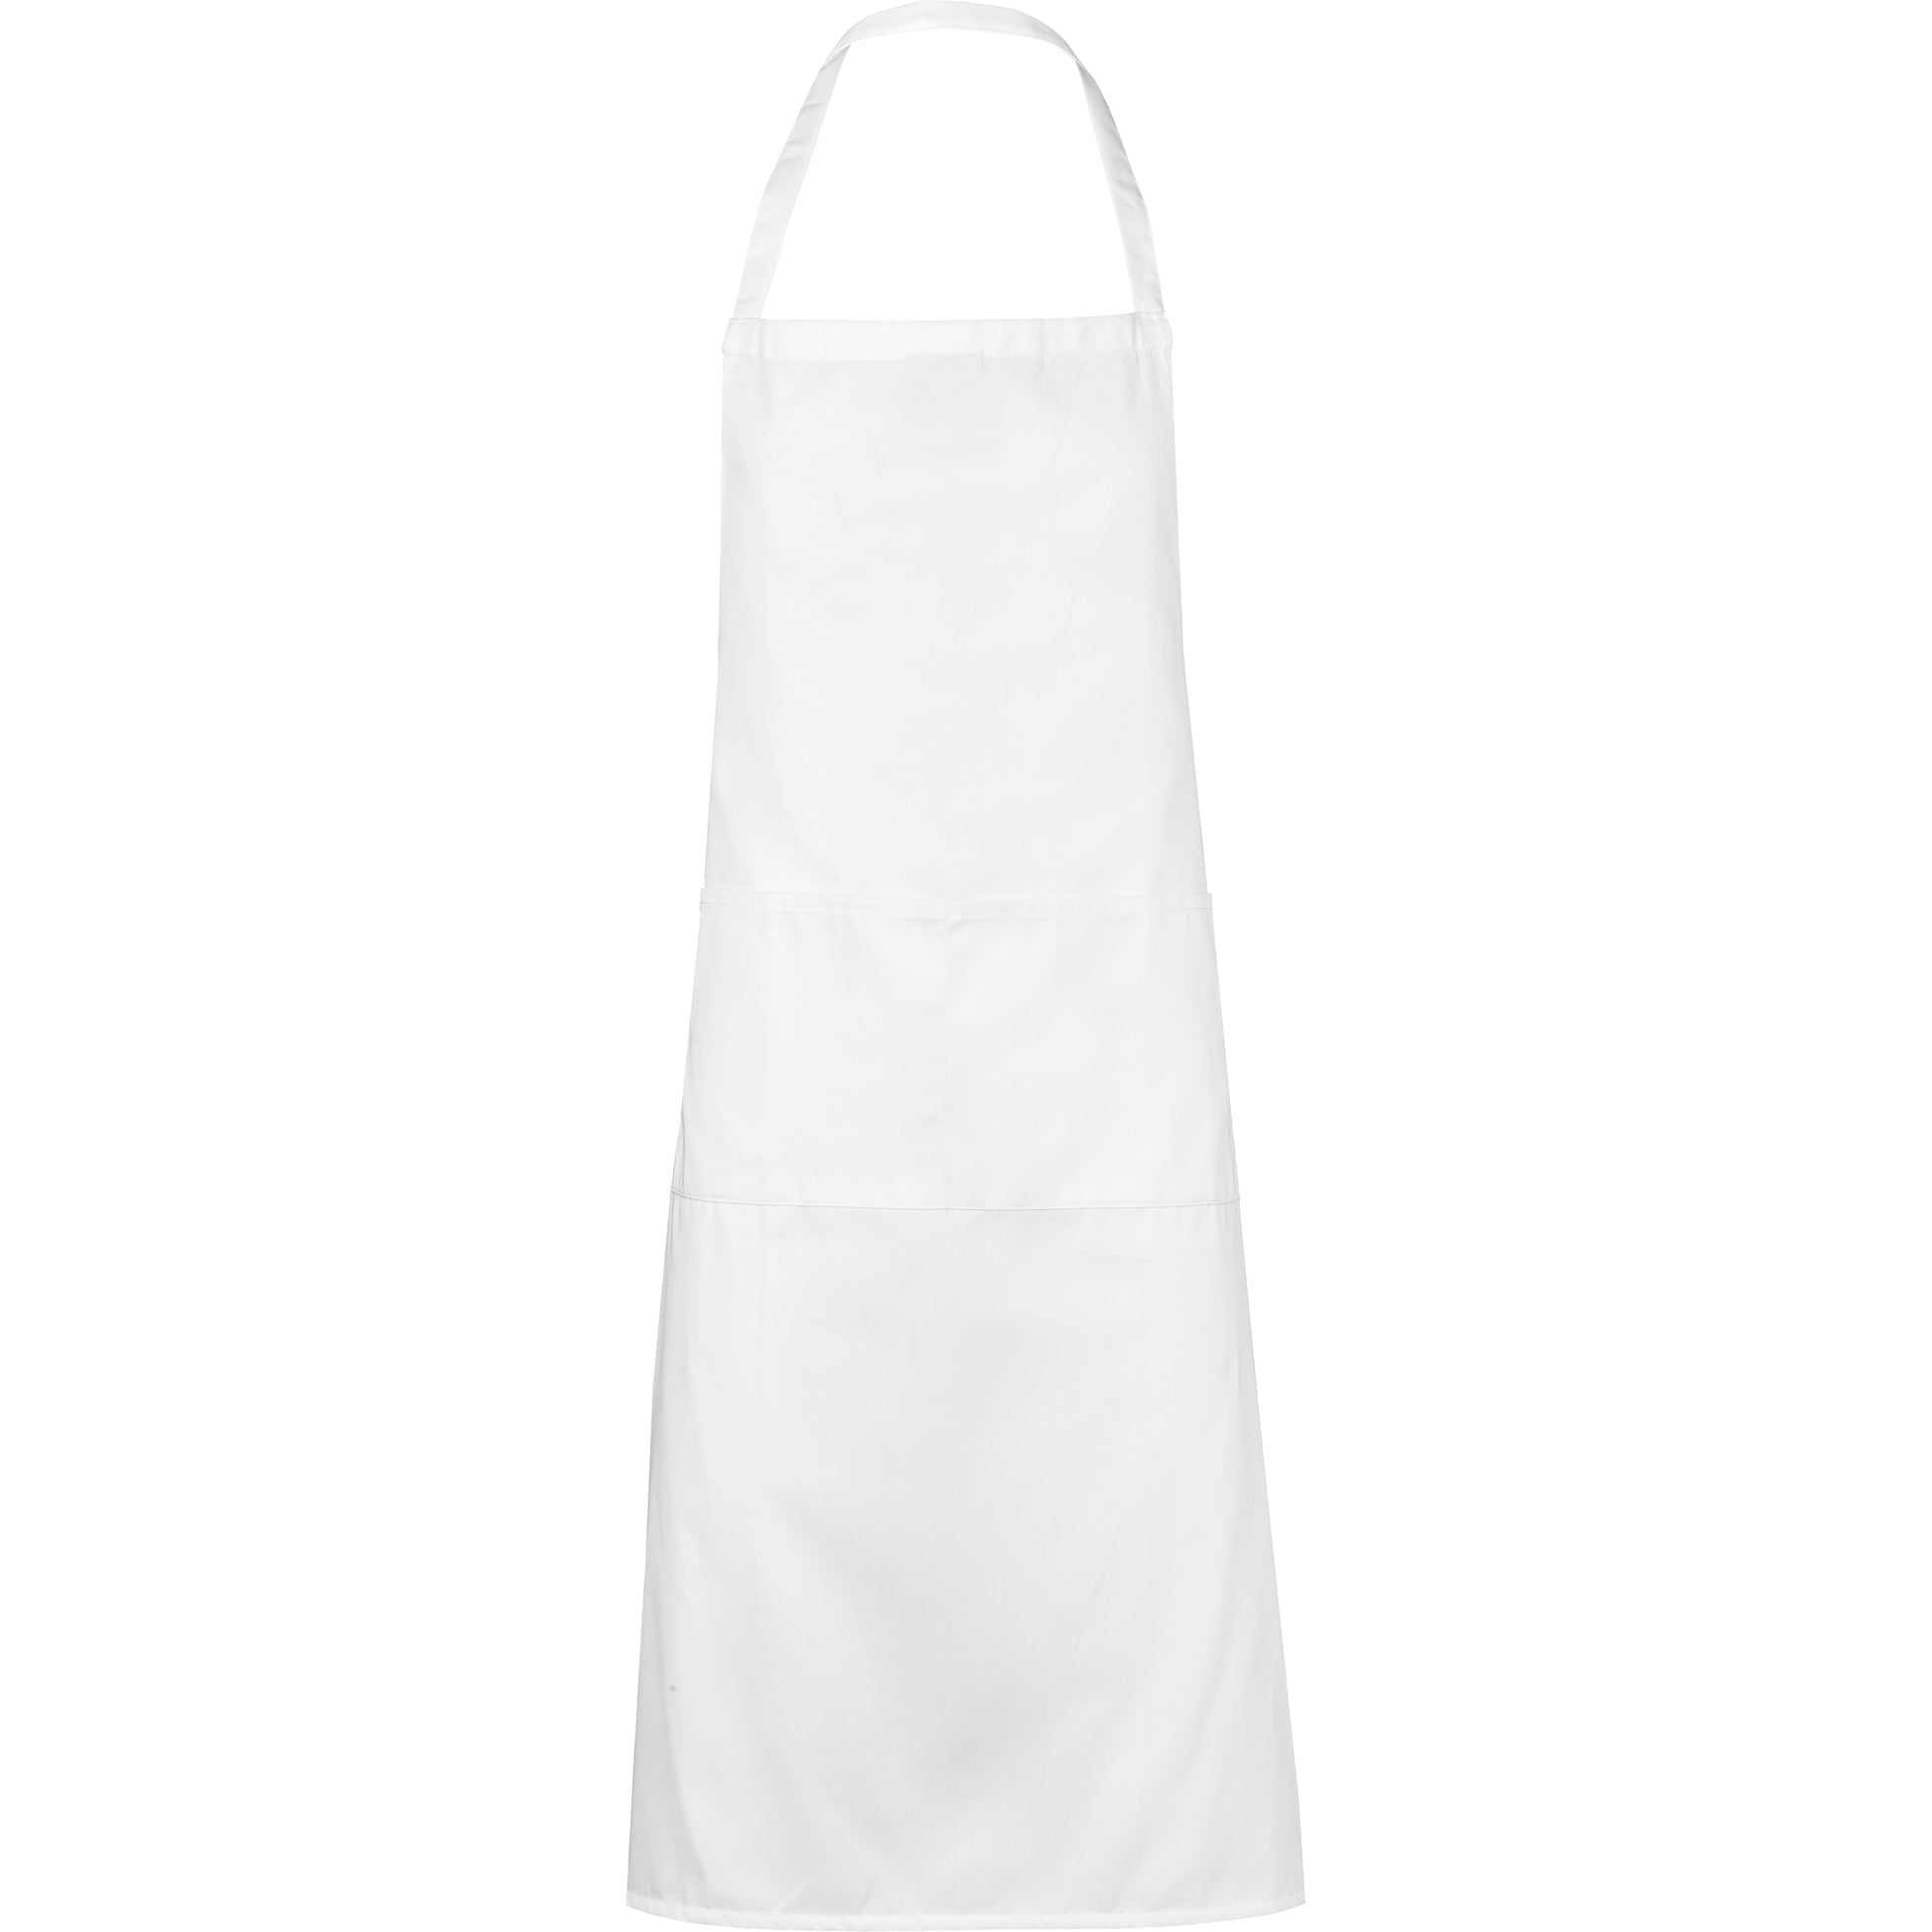 Personalised apron - white. Your design